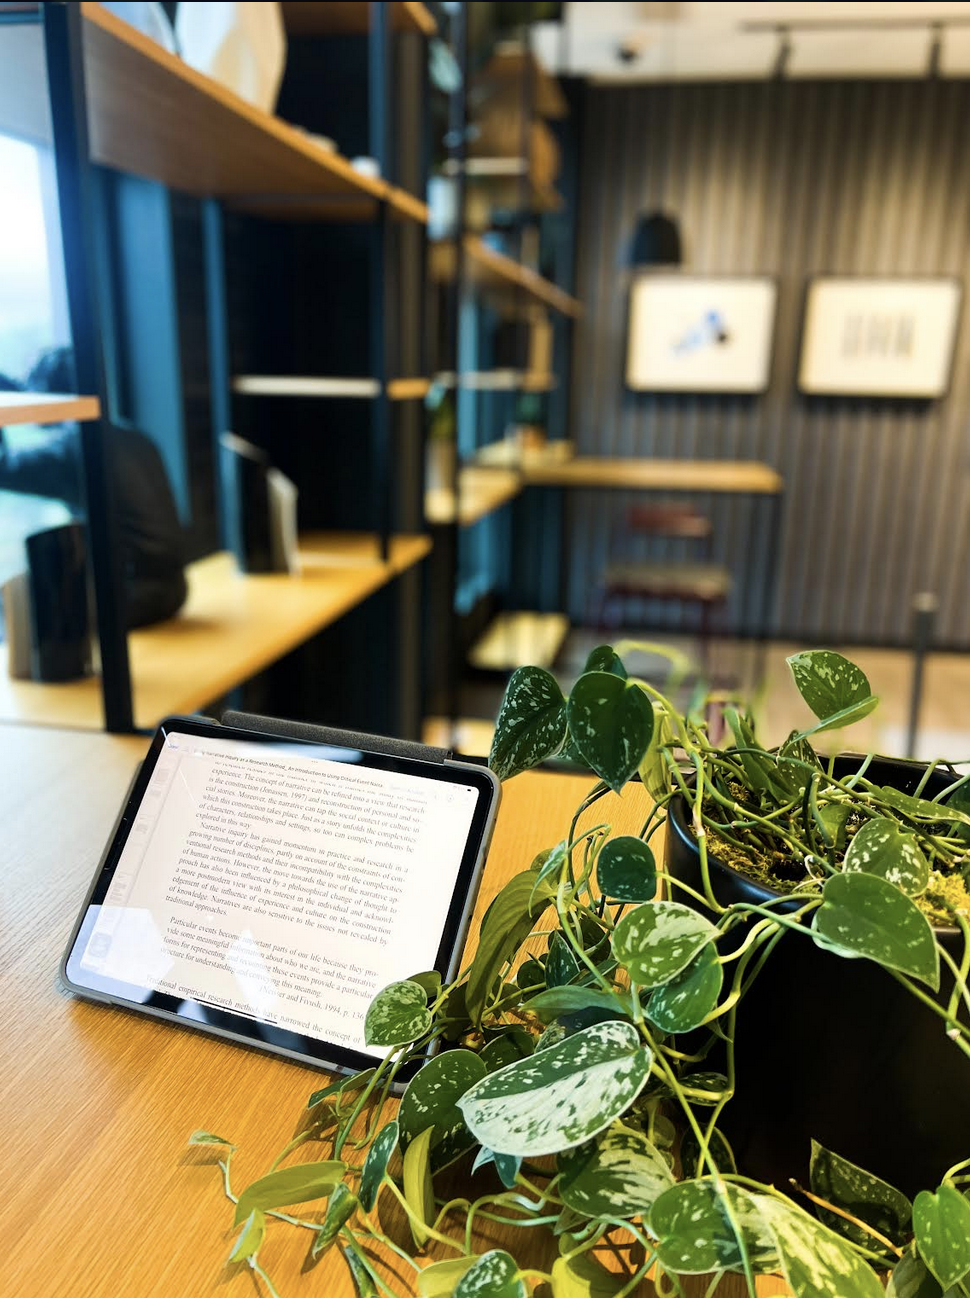 A tablet resting on a desk next to a green plant